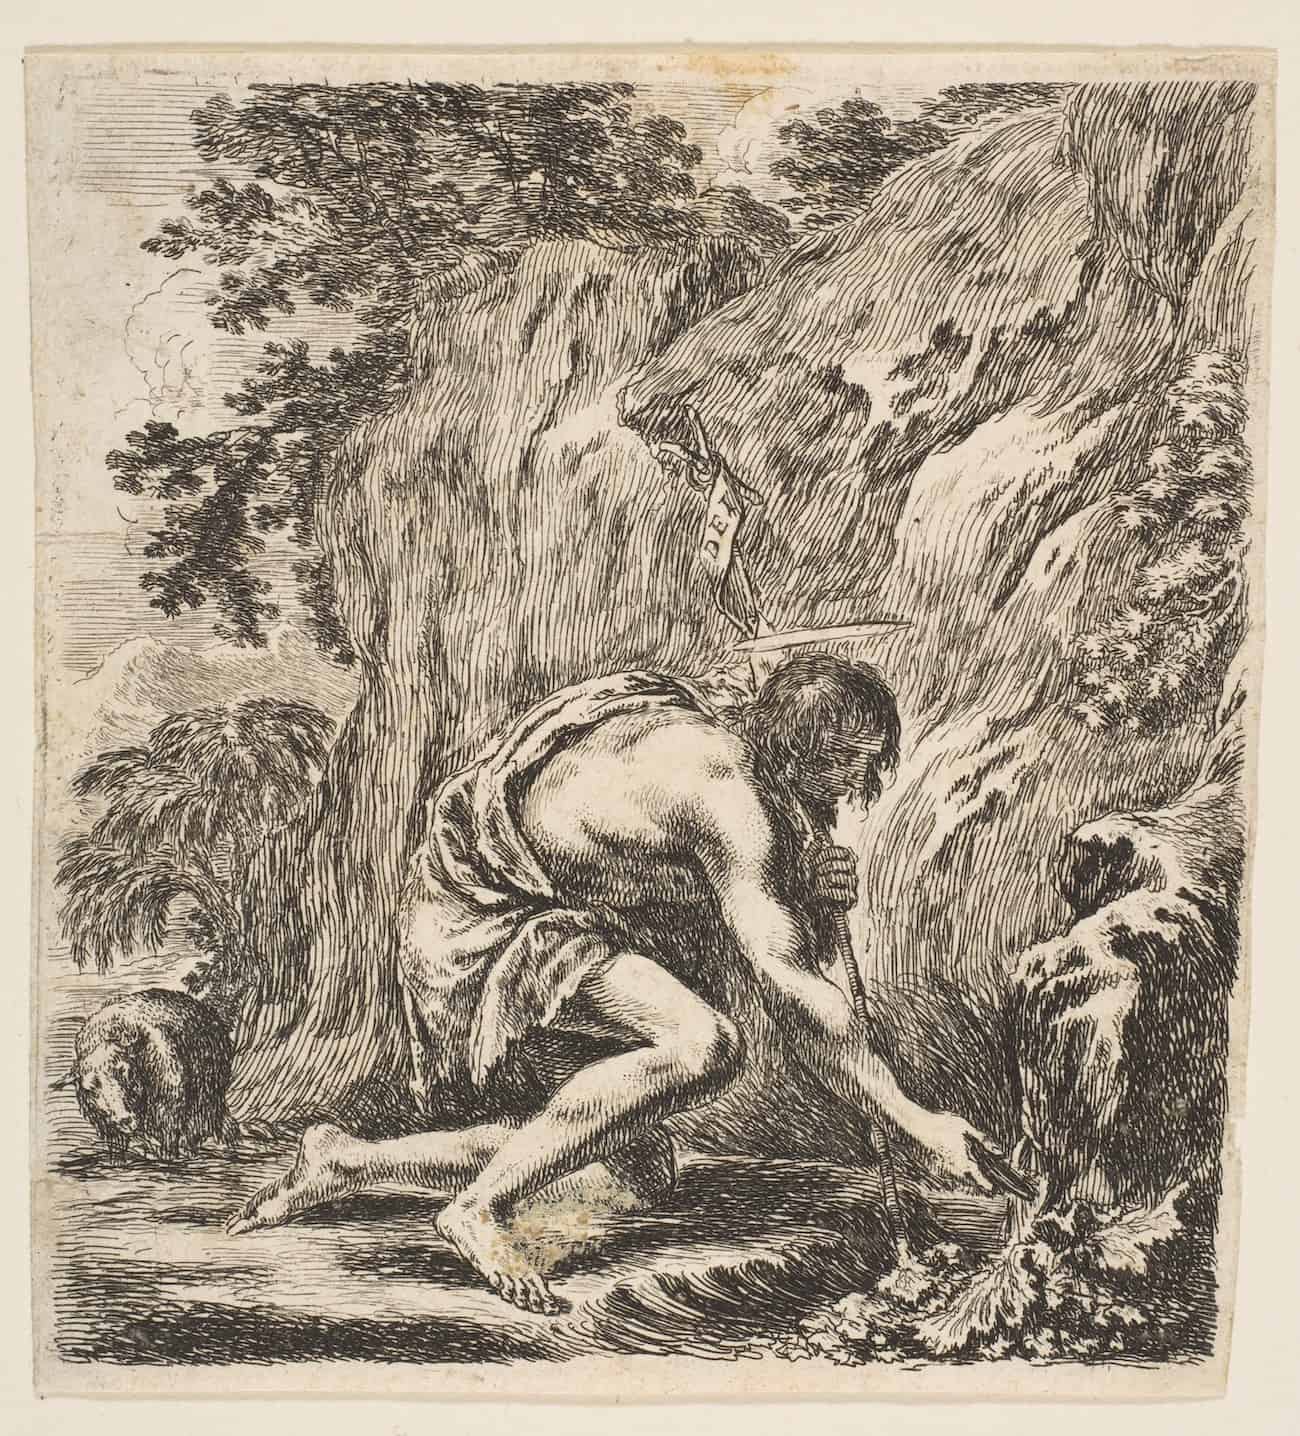 St. John the Baptist Drawing Water from a Spring, ca. 1649, Stefano della Bella, The Metropolitan Museum of Art (article on balneotherapy)